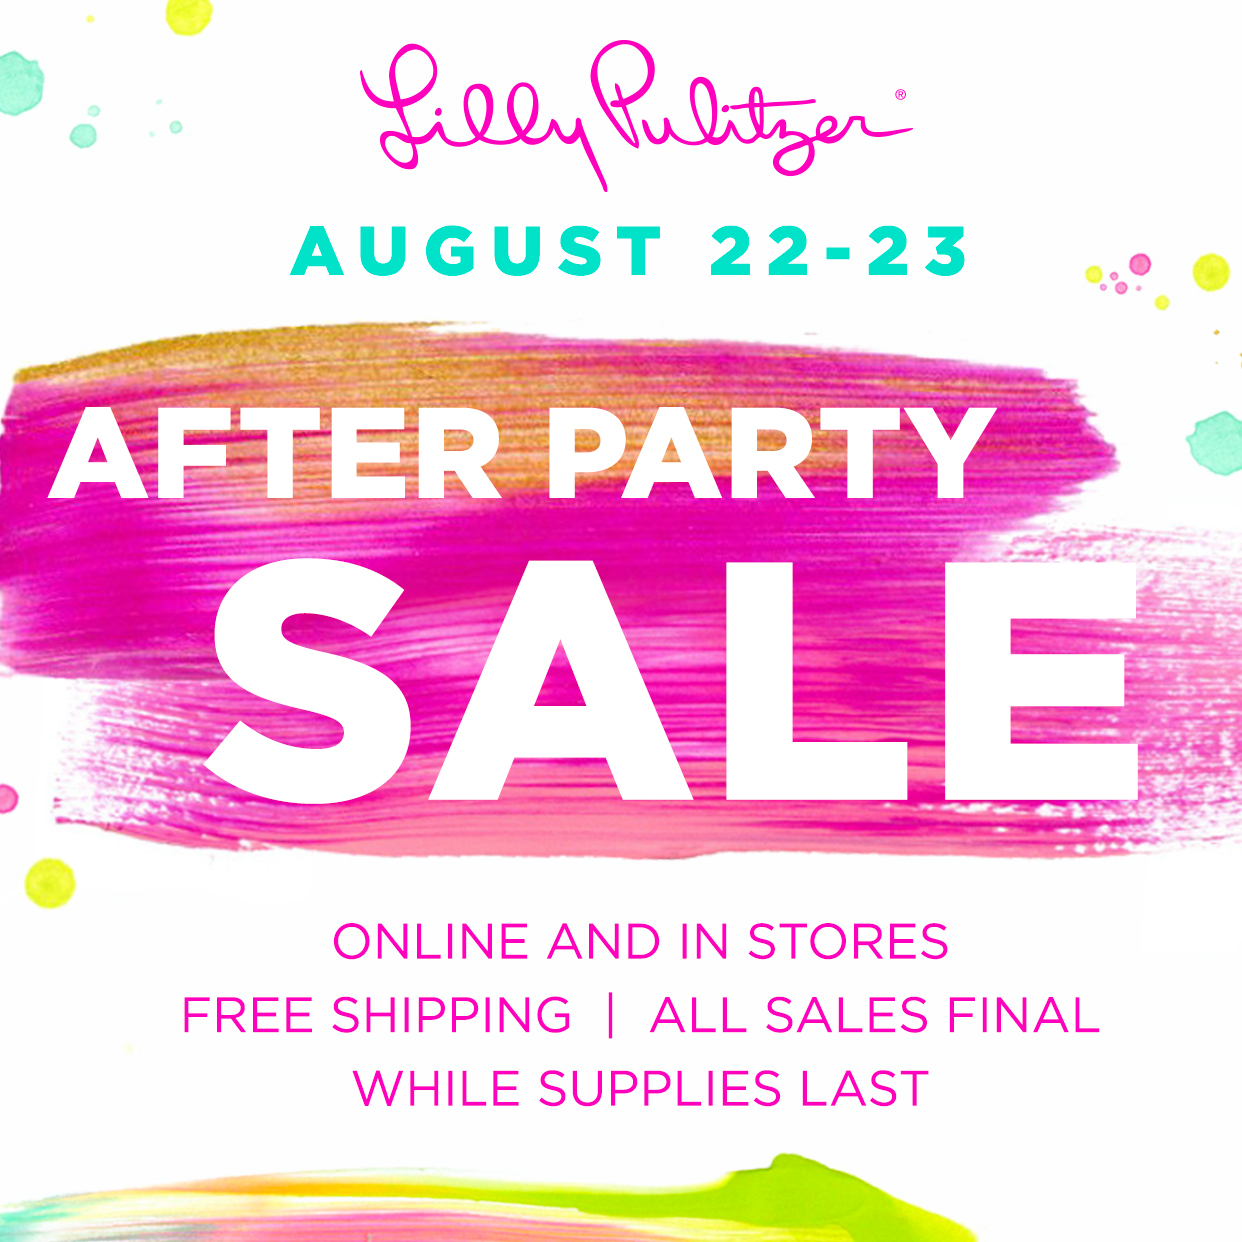 The Lilly Pulitzer After Party Sale from 8/22-8/23